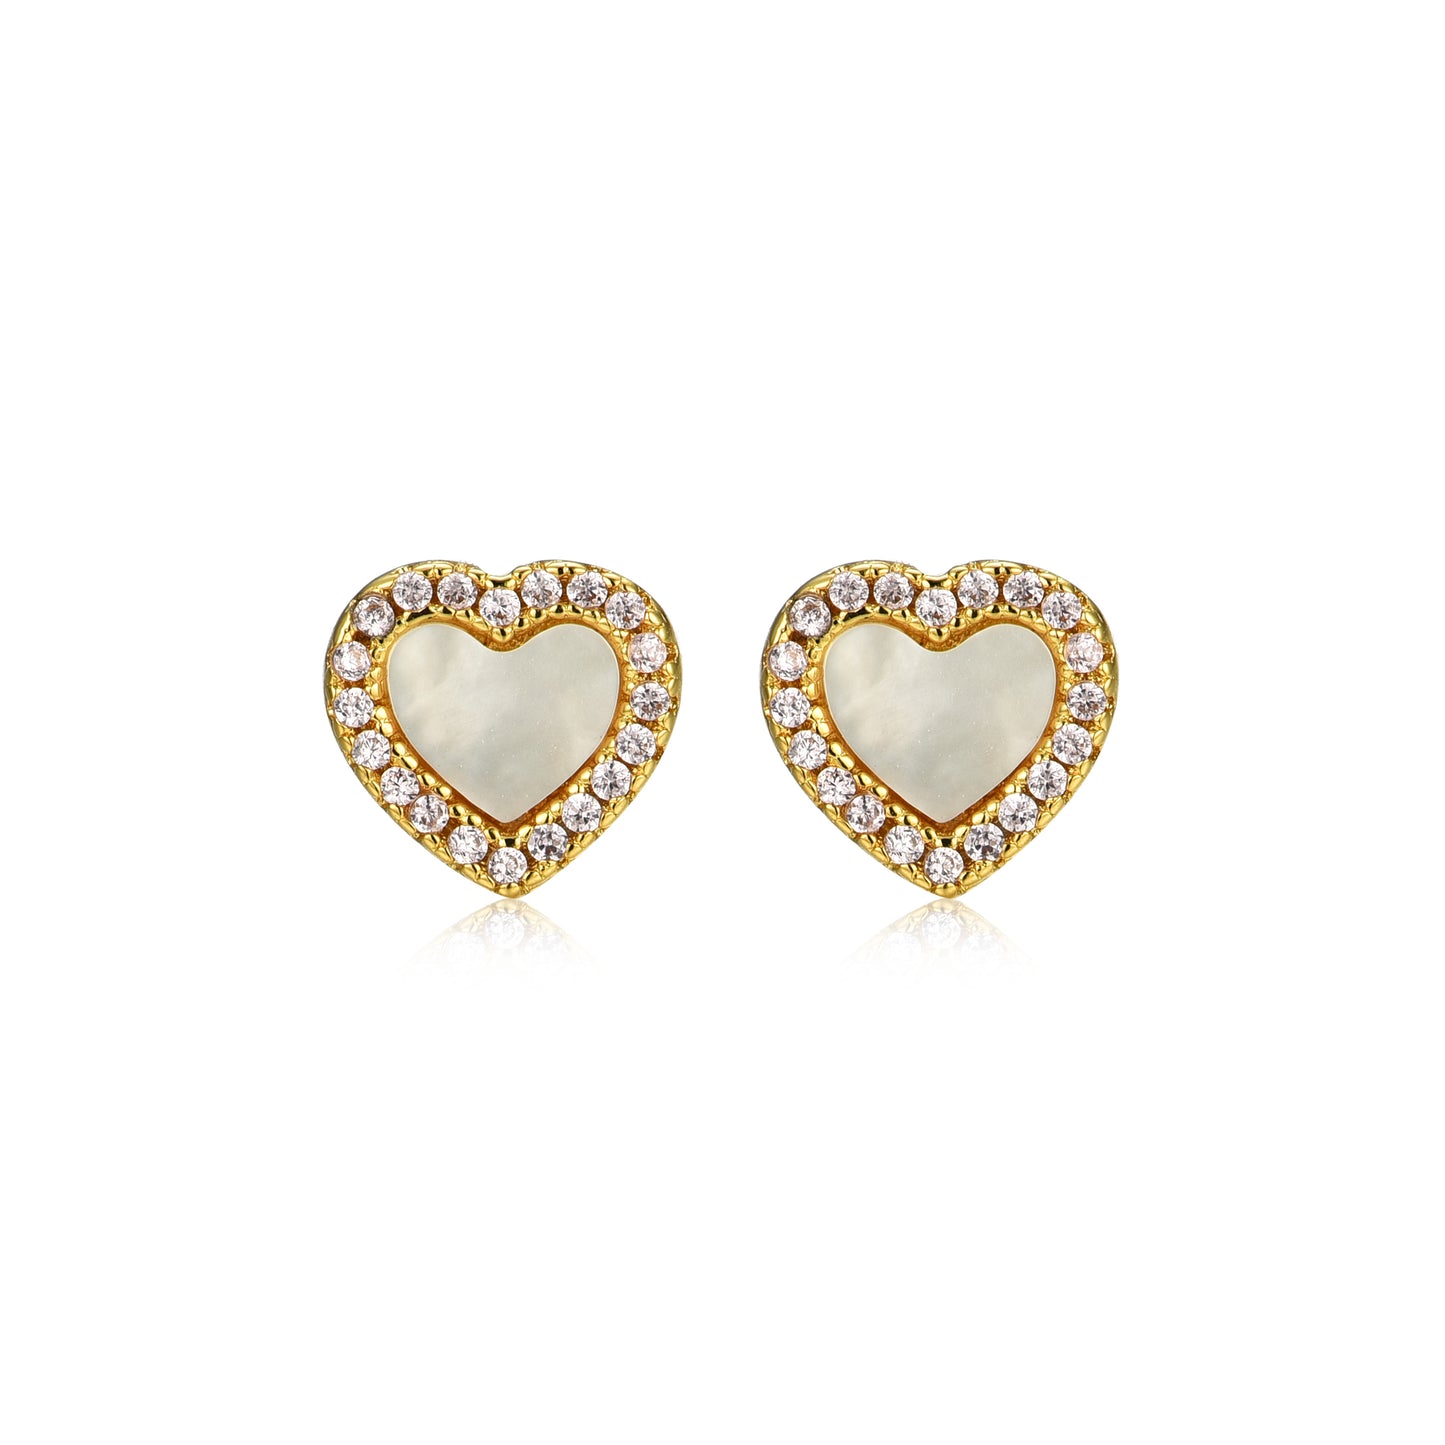 Gold Plated Surgical Steel Pretty and Colorful Heart Dangle or Stud Earrings